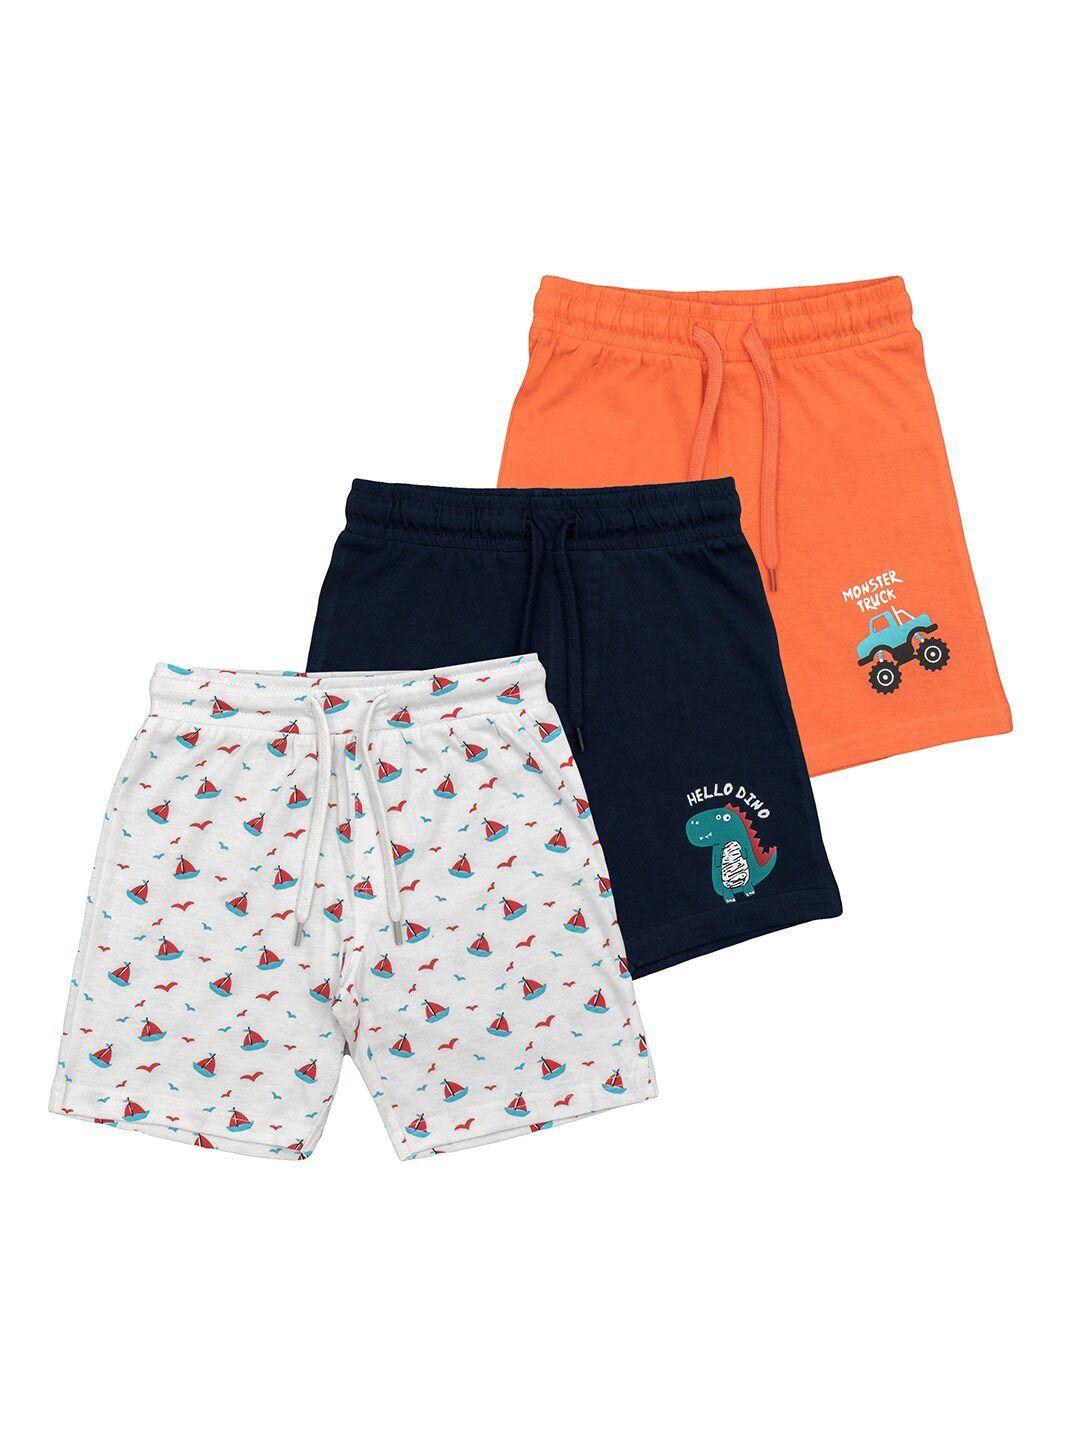 baesd-pack-of-3-boys-assorted-cotton-shorts